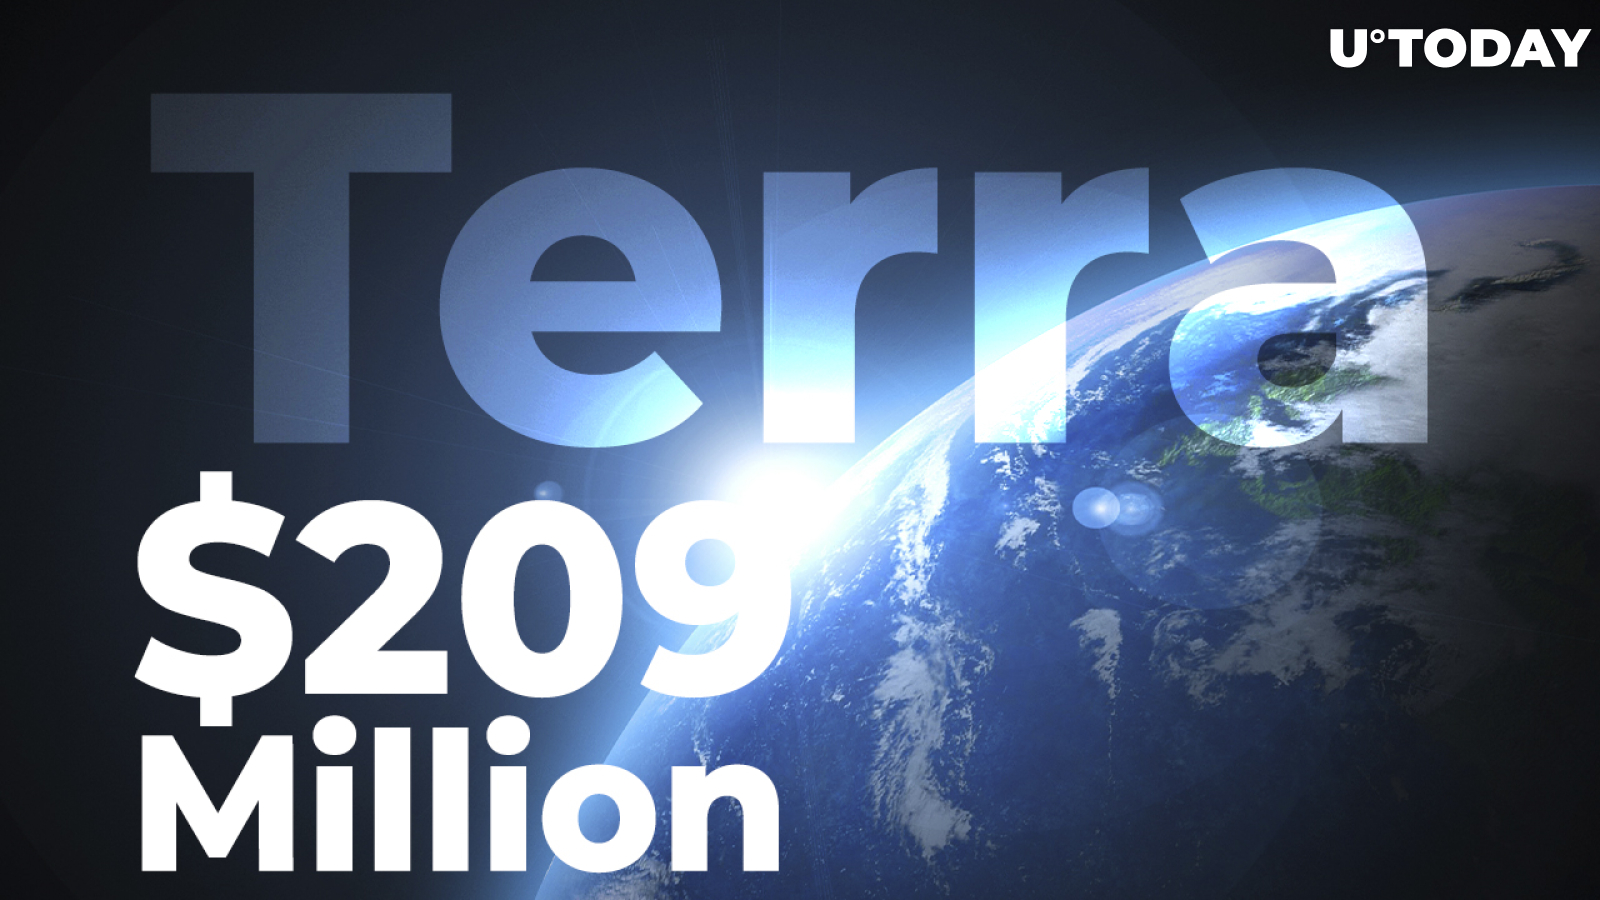 Terra Launches Floating Interest Lending Services, Reserves Are Now at $209 Million